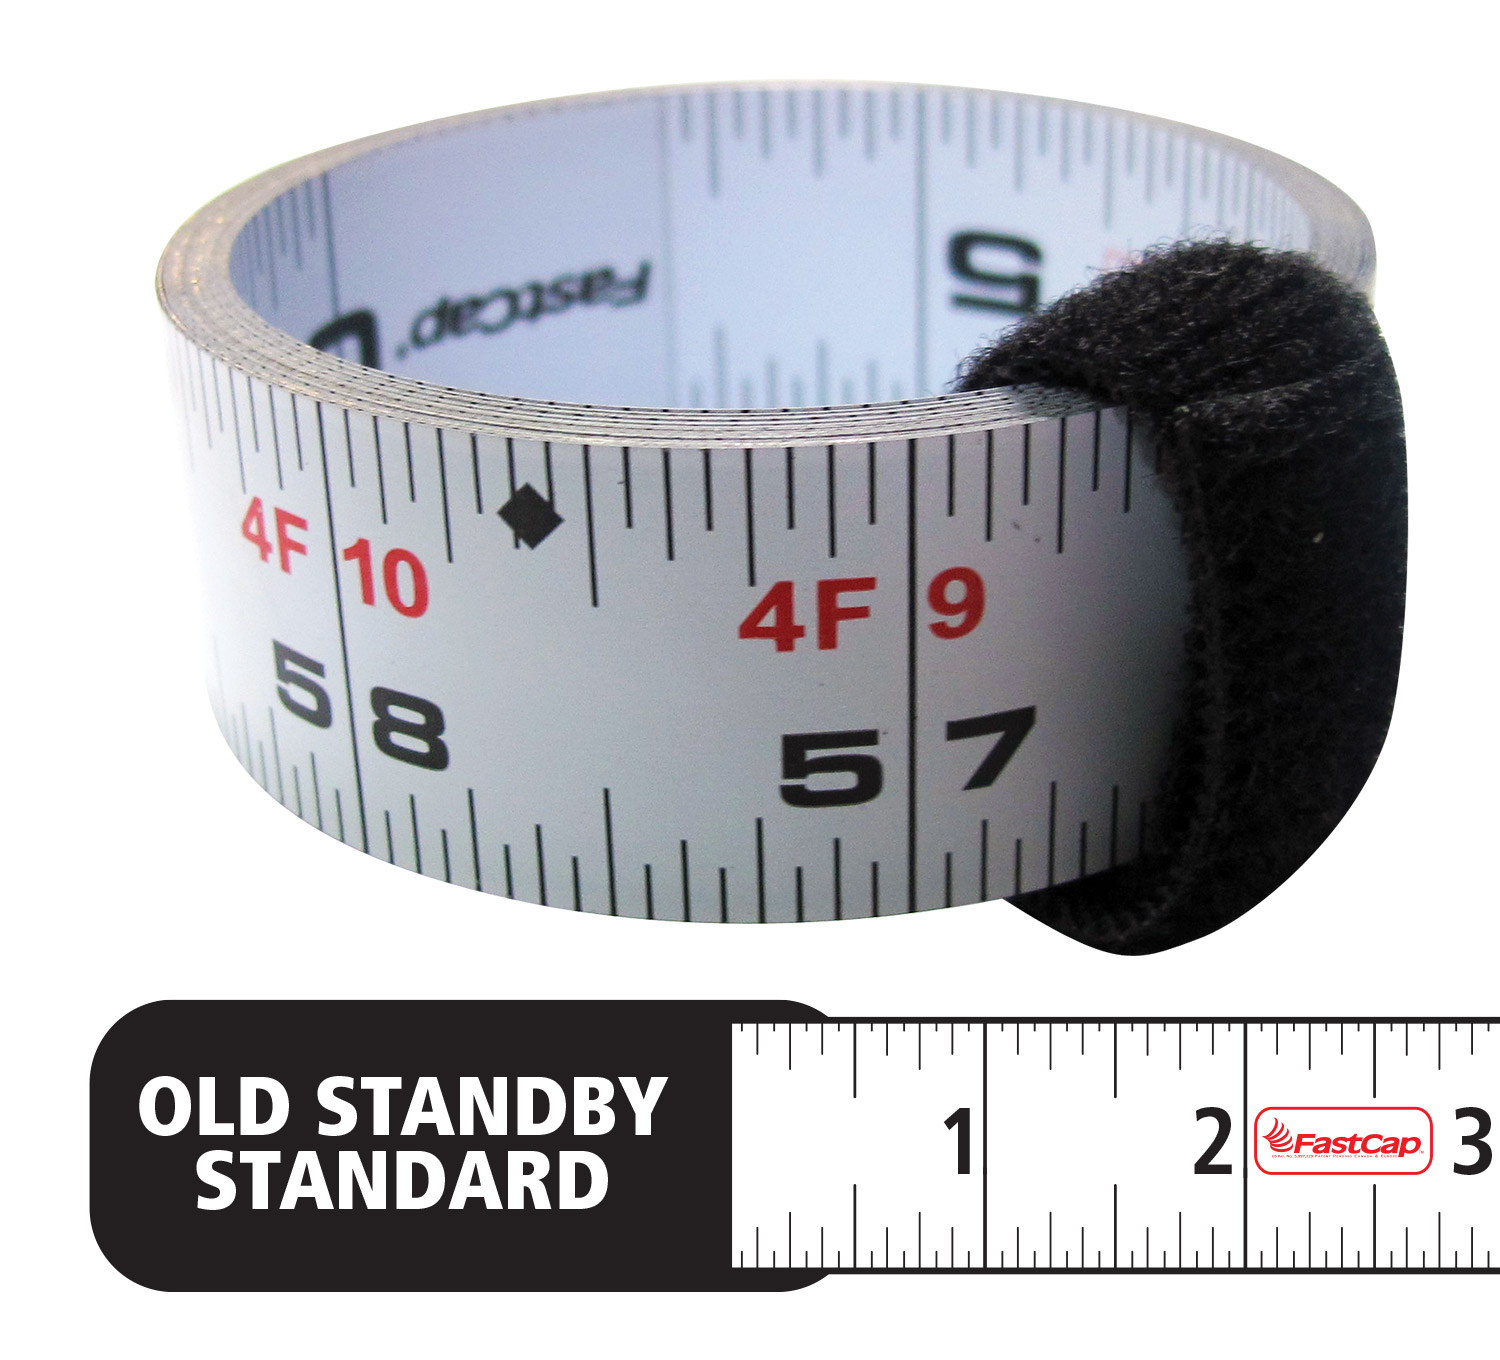 FastCap Standard Peel & Stick Measuring Tape for Luthier workbench, layouts  16